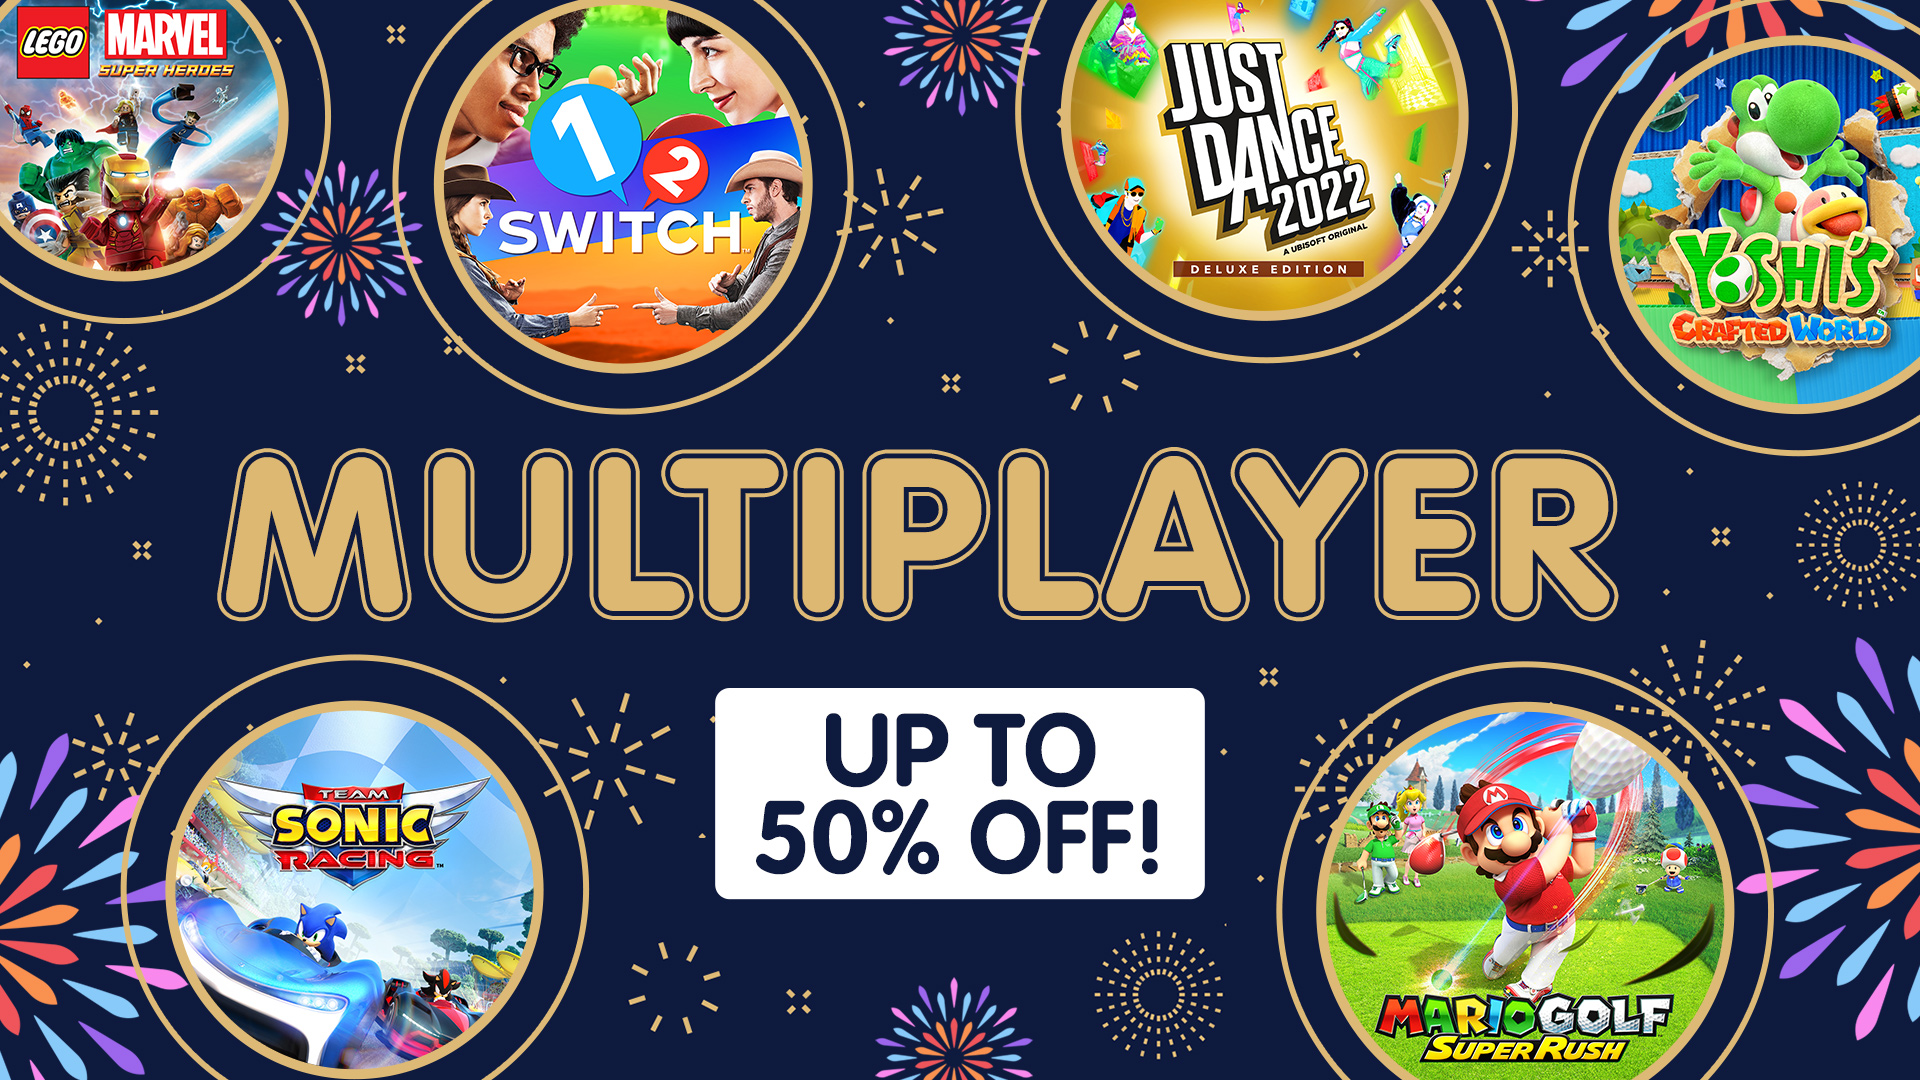 UK & Europe] Nintendo Hosting New Year Sale With Up To 50% Miketendo64